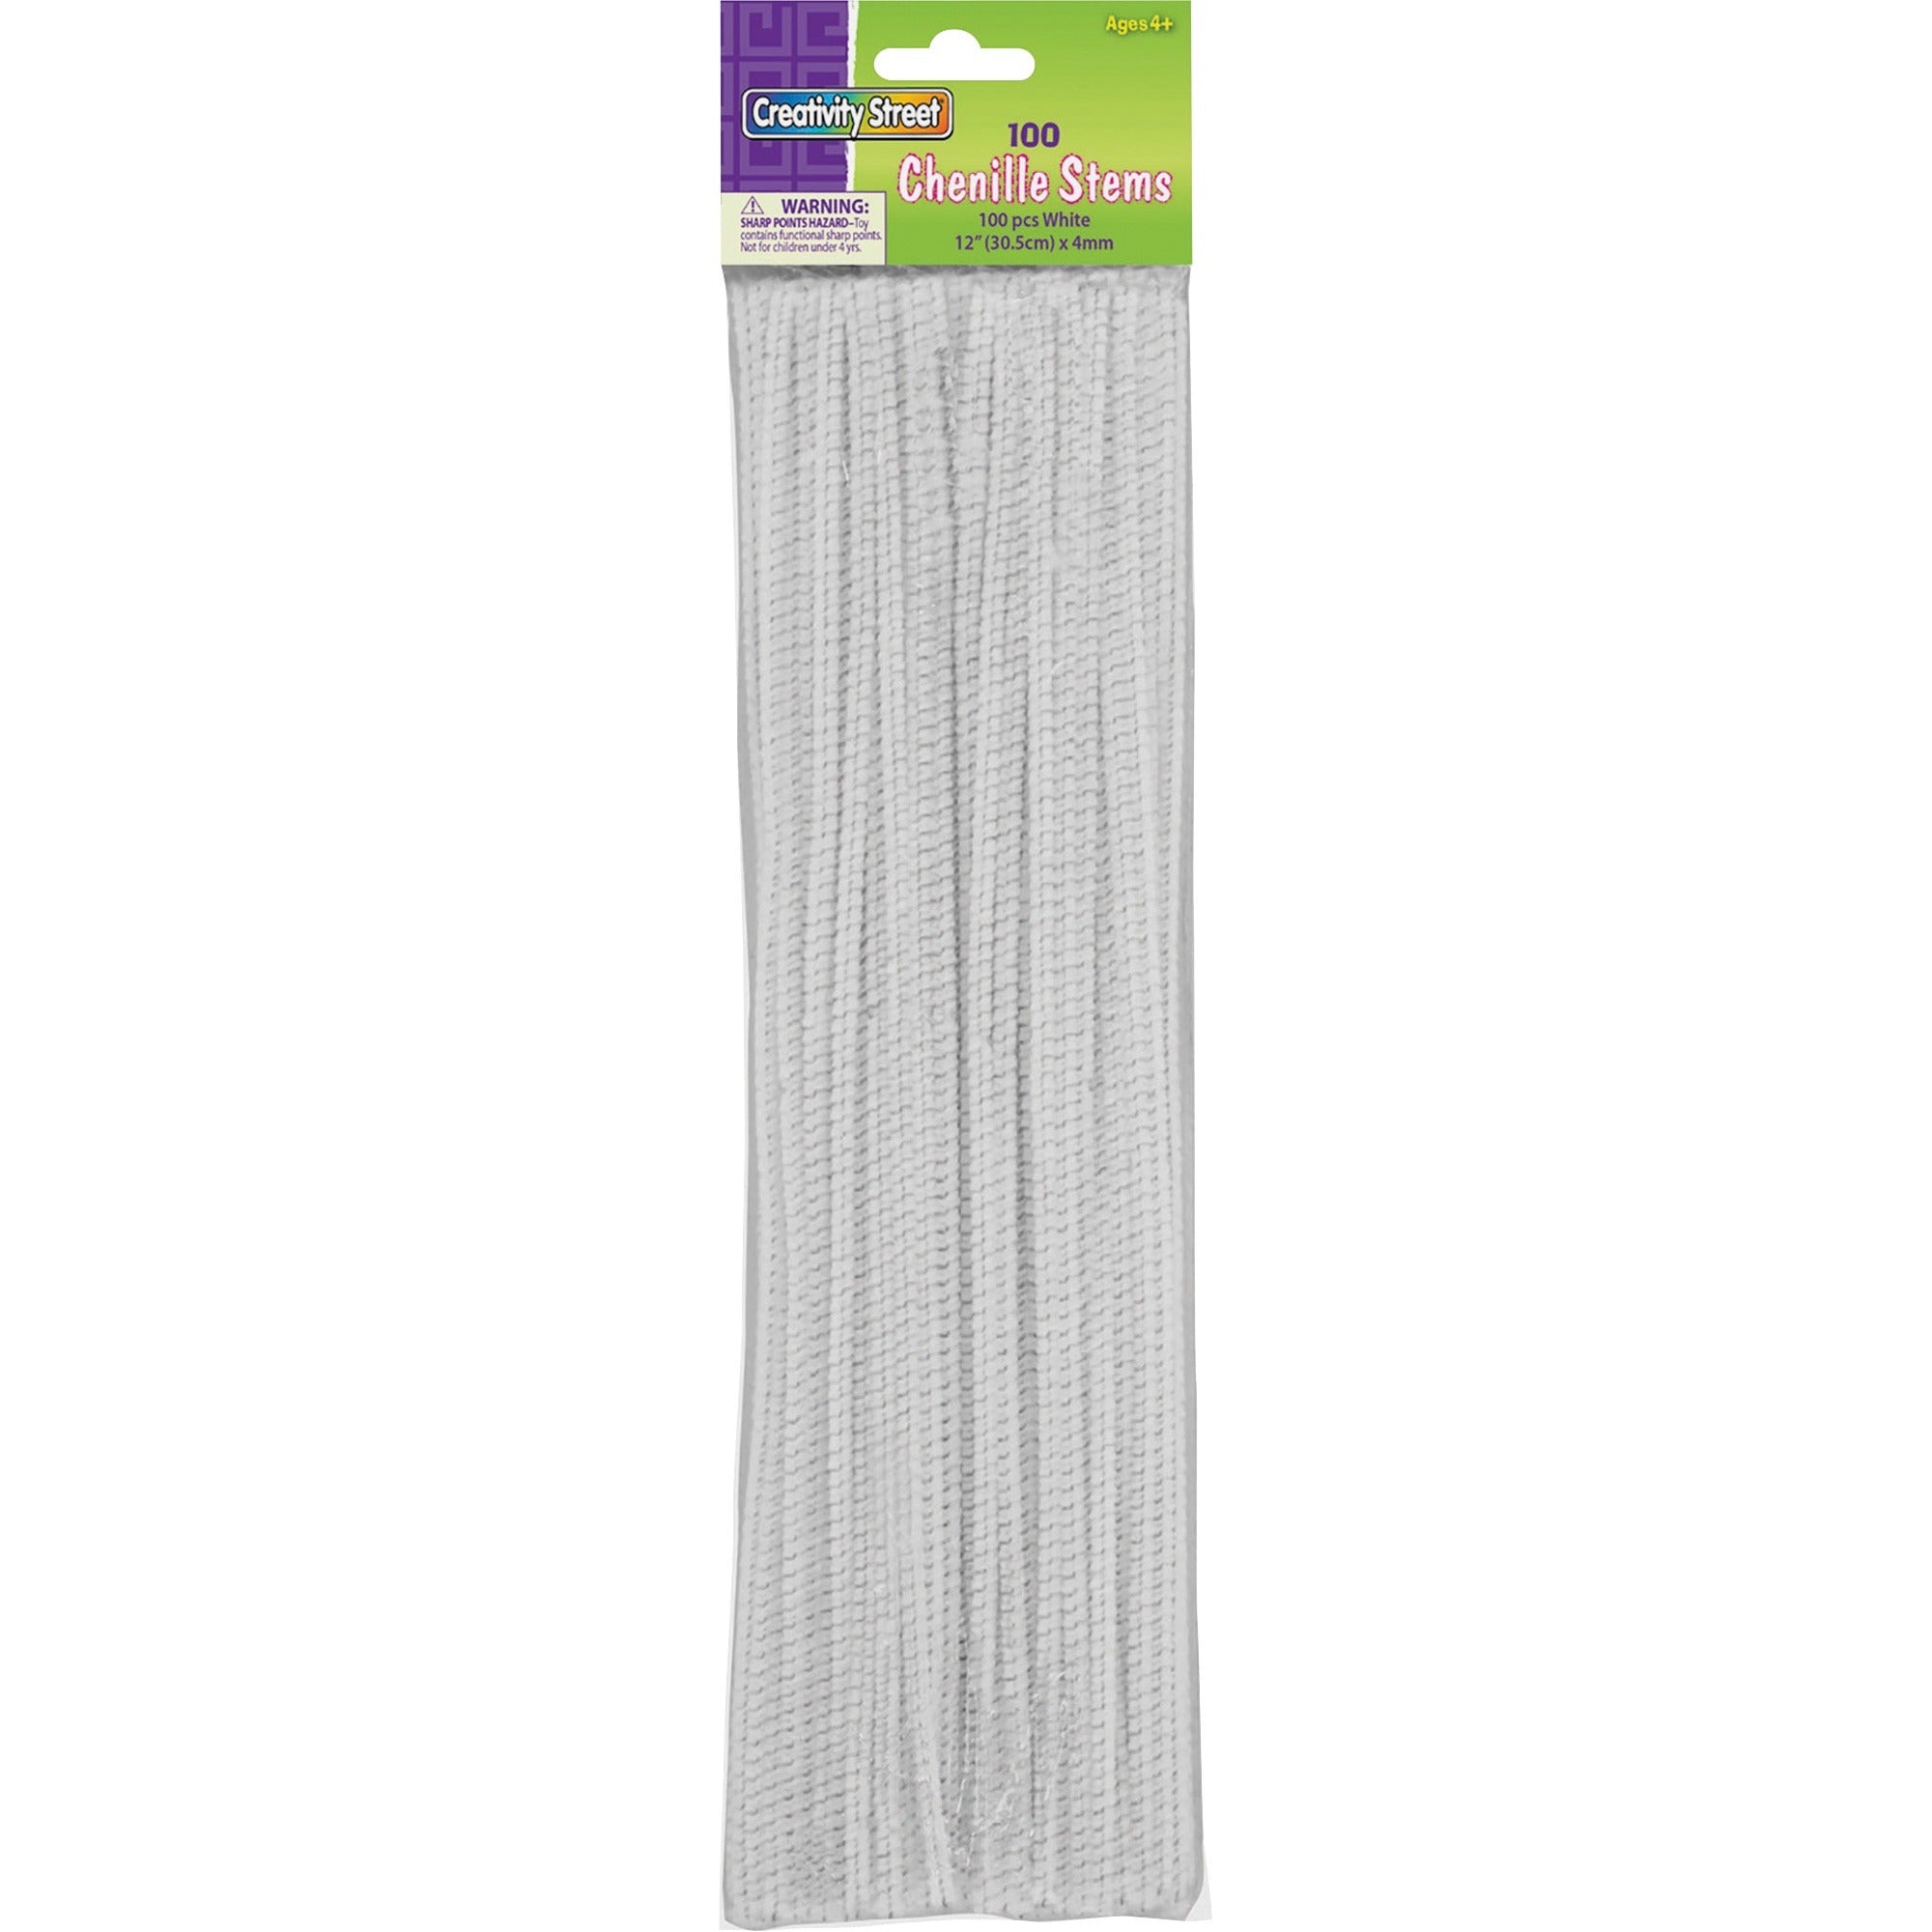 creativity-street-chenille-stems-classroom-activities-craft-project-recommended-for-4-year-x-12length-x-02diameter-100-pack-white-polyester_pac711202 - 1